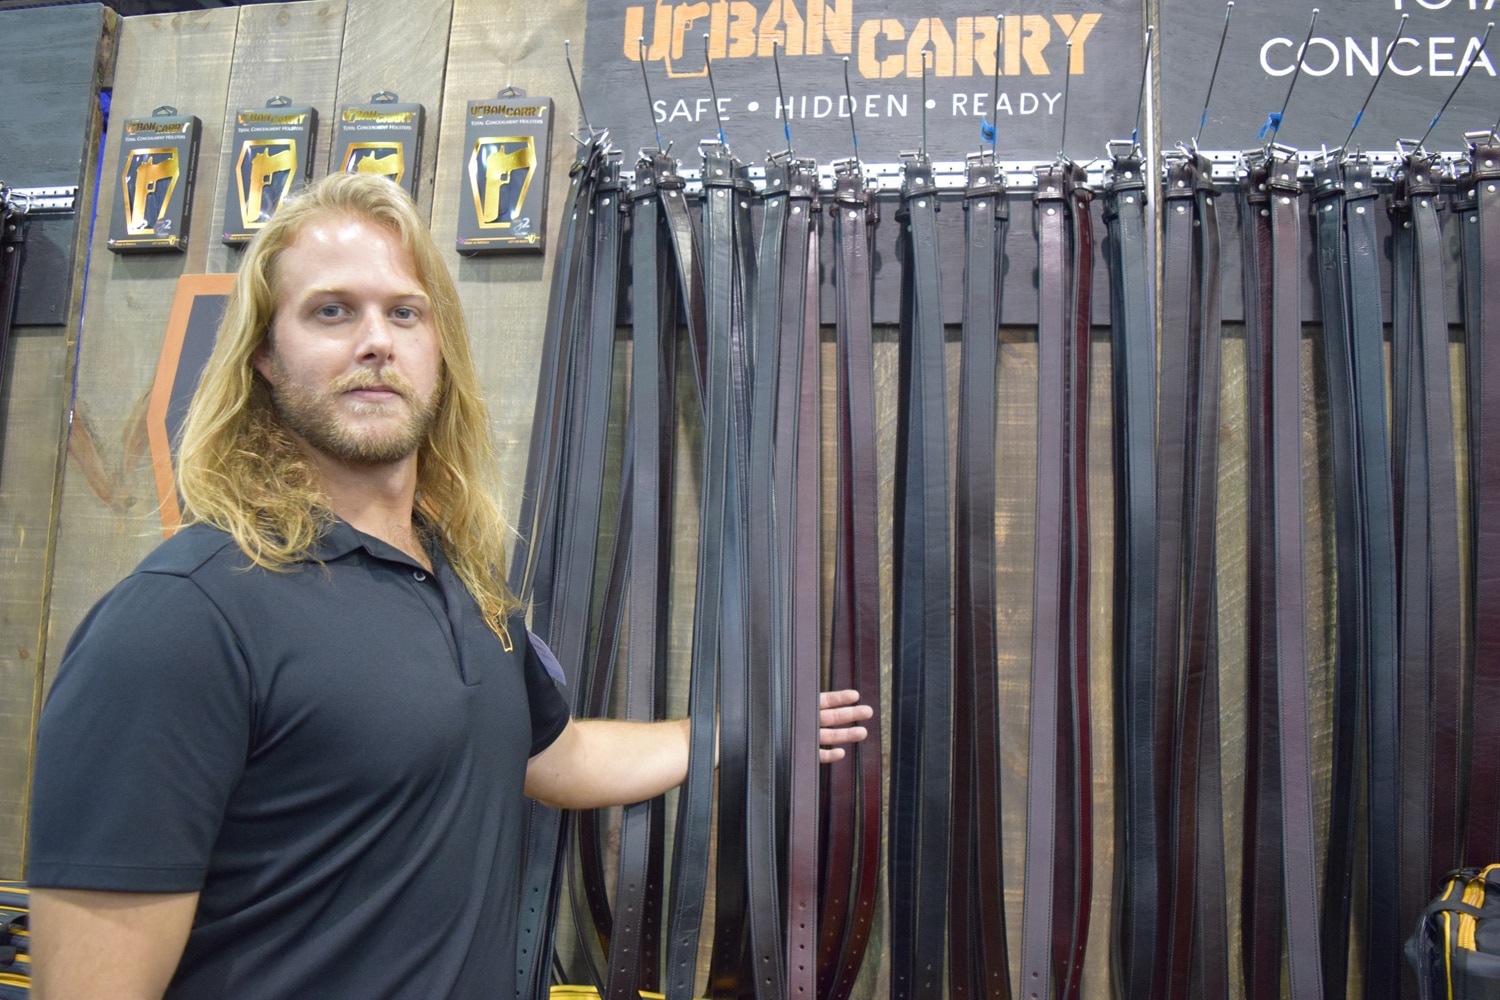 Plenty of belts at Urban Carry. The spokesman says the leather holds up so well that they outlast the buckle. (Photo: Daniel Terrill/Guns.com)